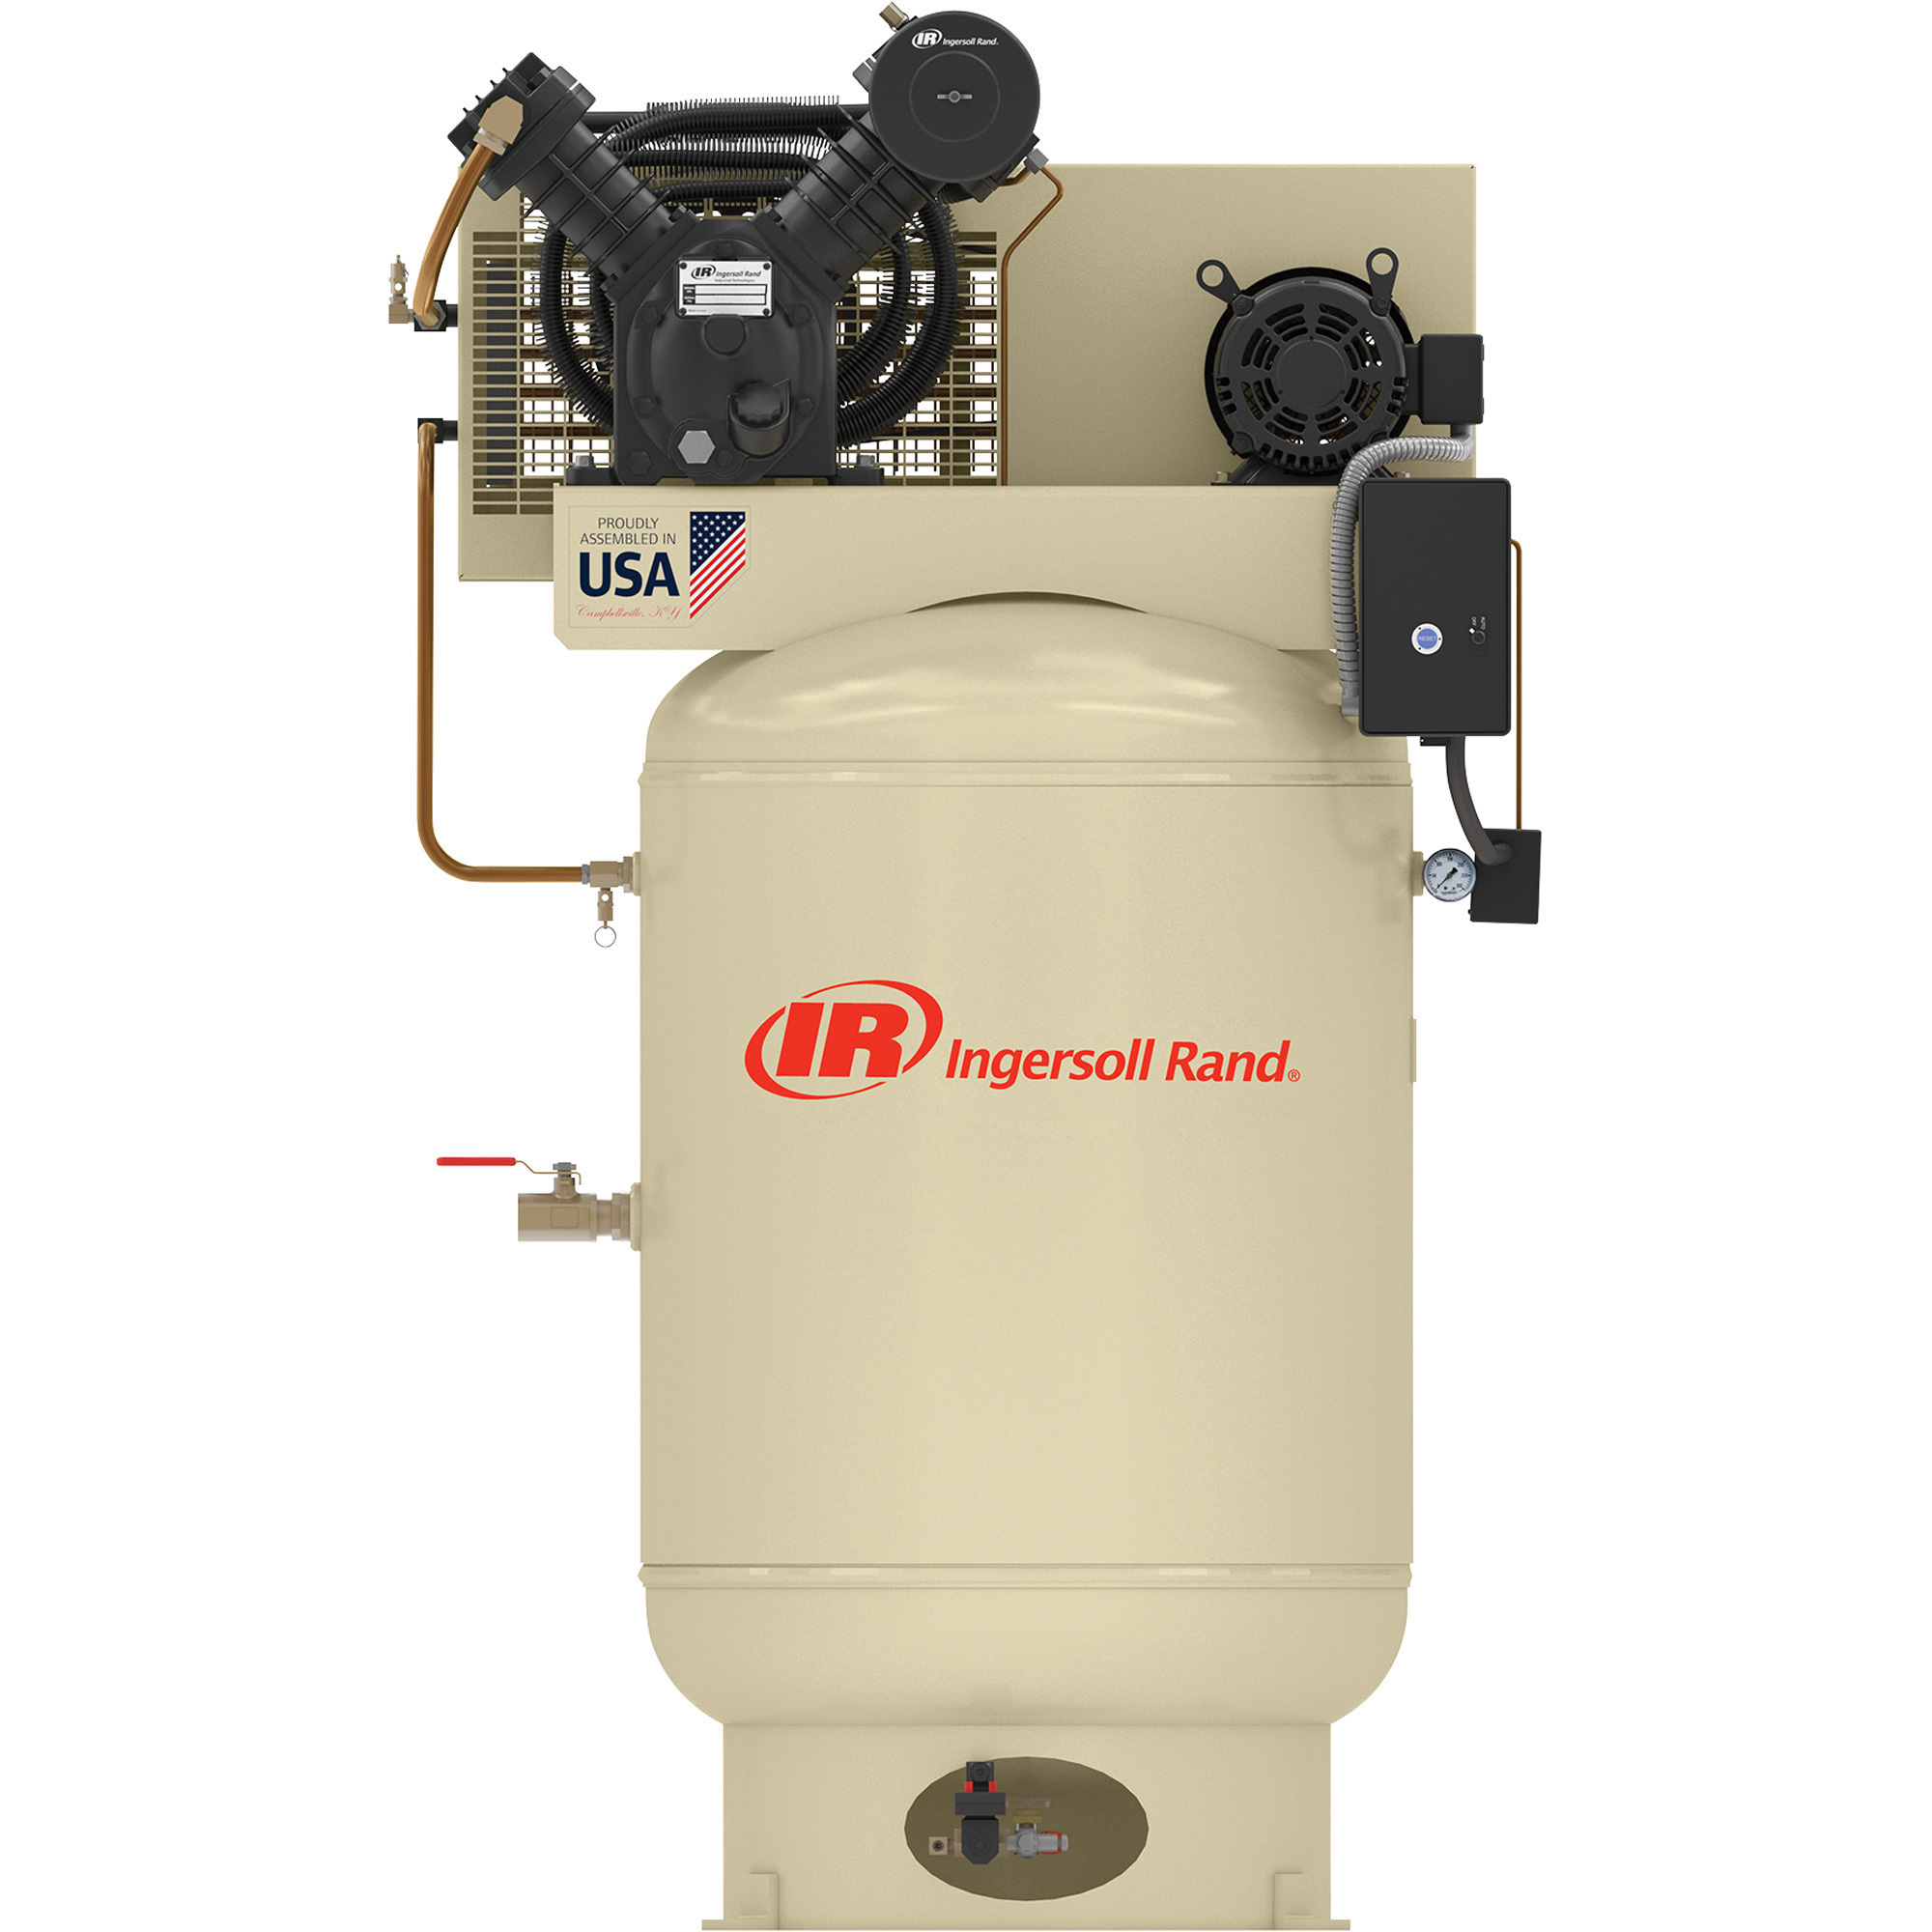 Ingersoll Rand Electric Two-Stage Air Compressor, Premium Value Package, 10 HP, 230 Volt, 3-Phase, 120 Gallon Vertical, Model 2545K10-VP 230/3/60